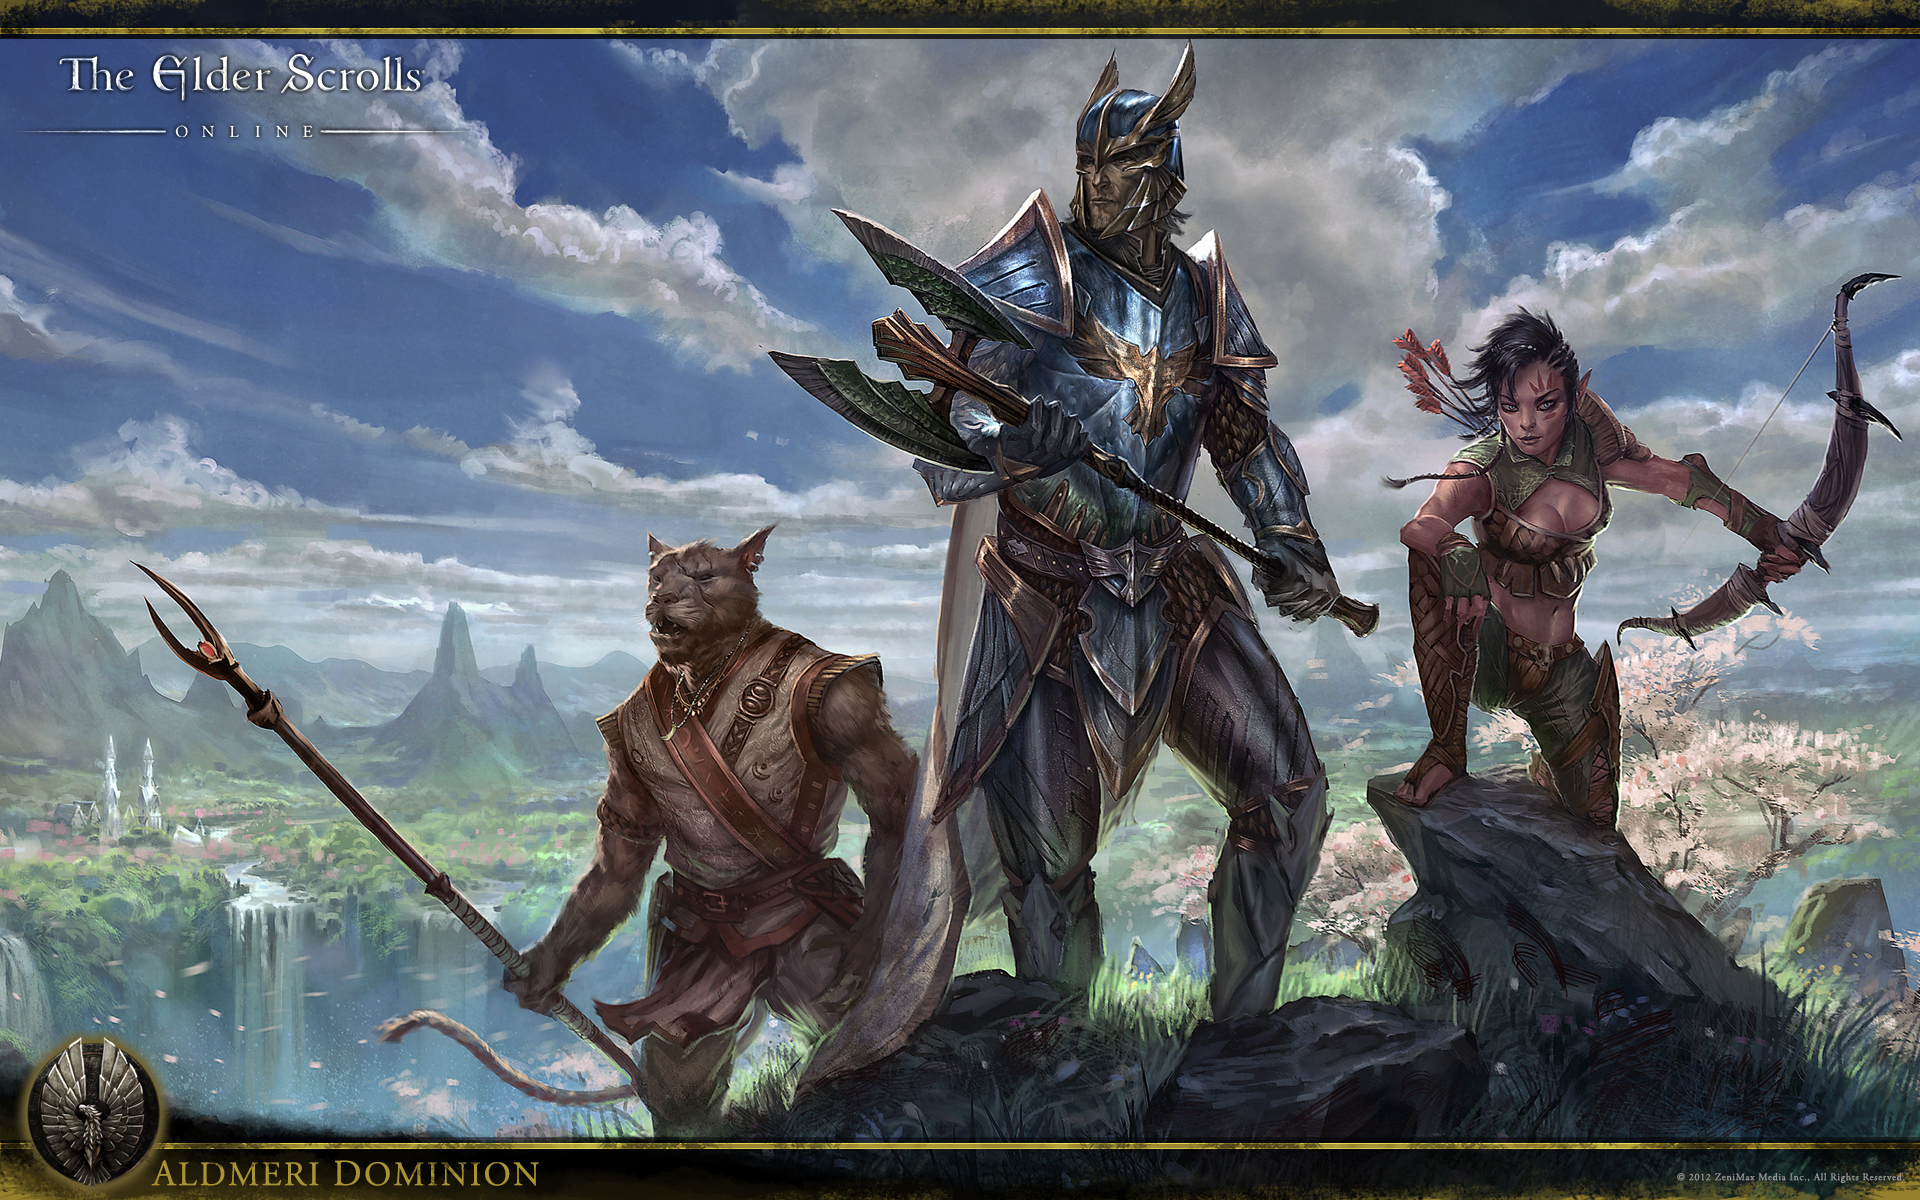 Play The Elder Scrolls Online BETA Today. Get Your Free Key Here! - Funstock